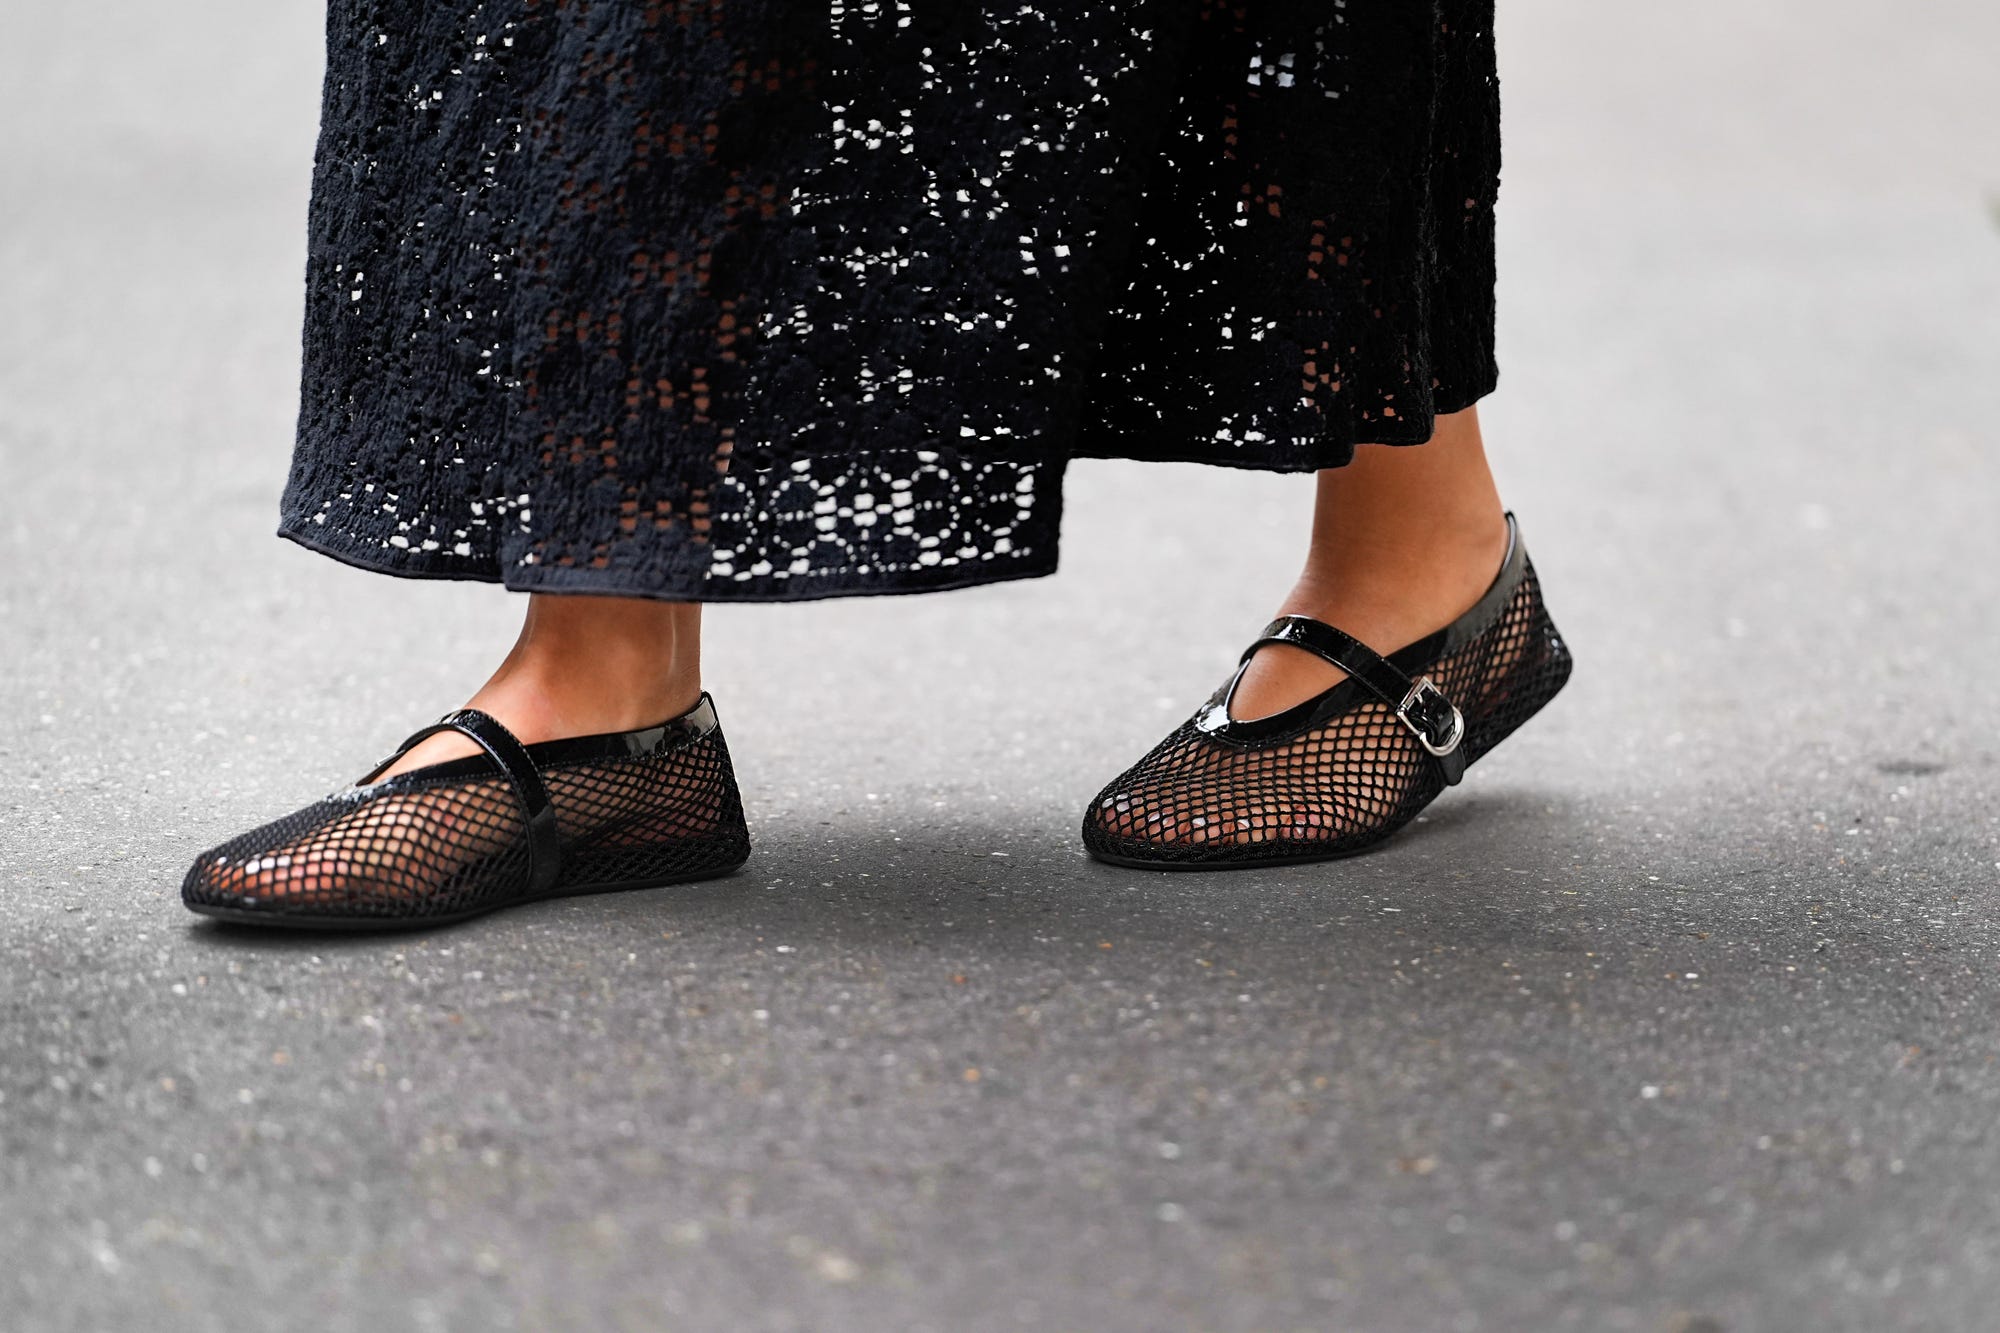 It's Official: The Mesh Ballet Flat Is *the* Shoe of the Season